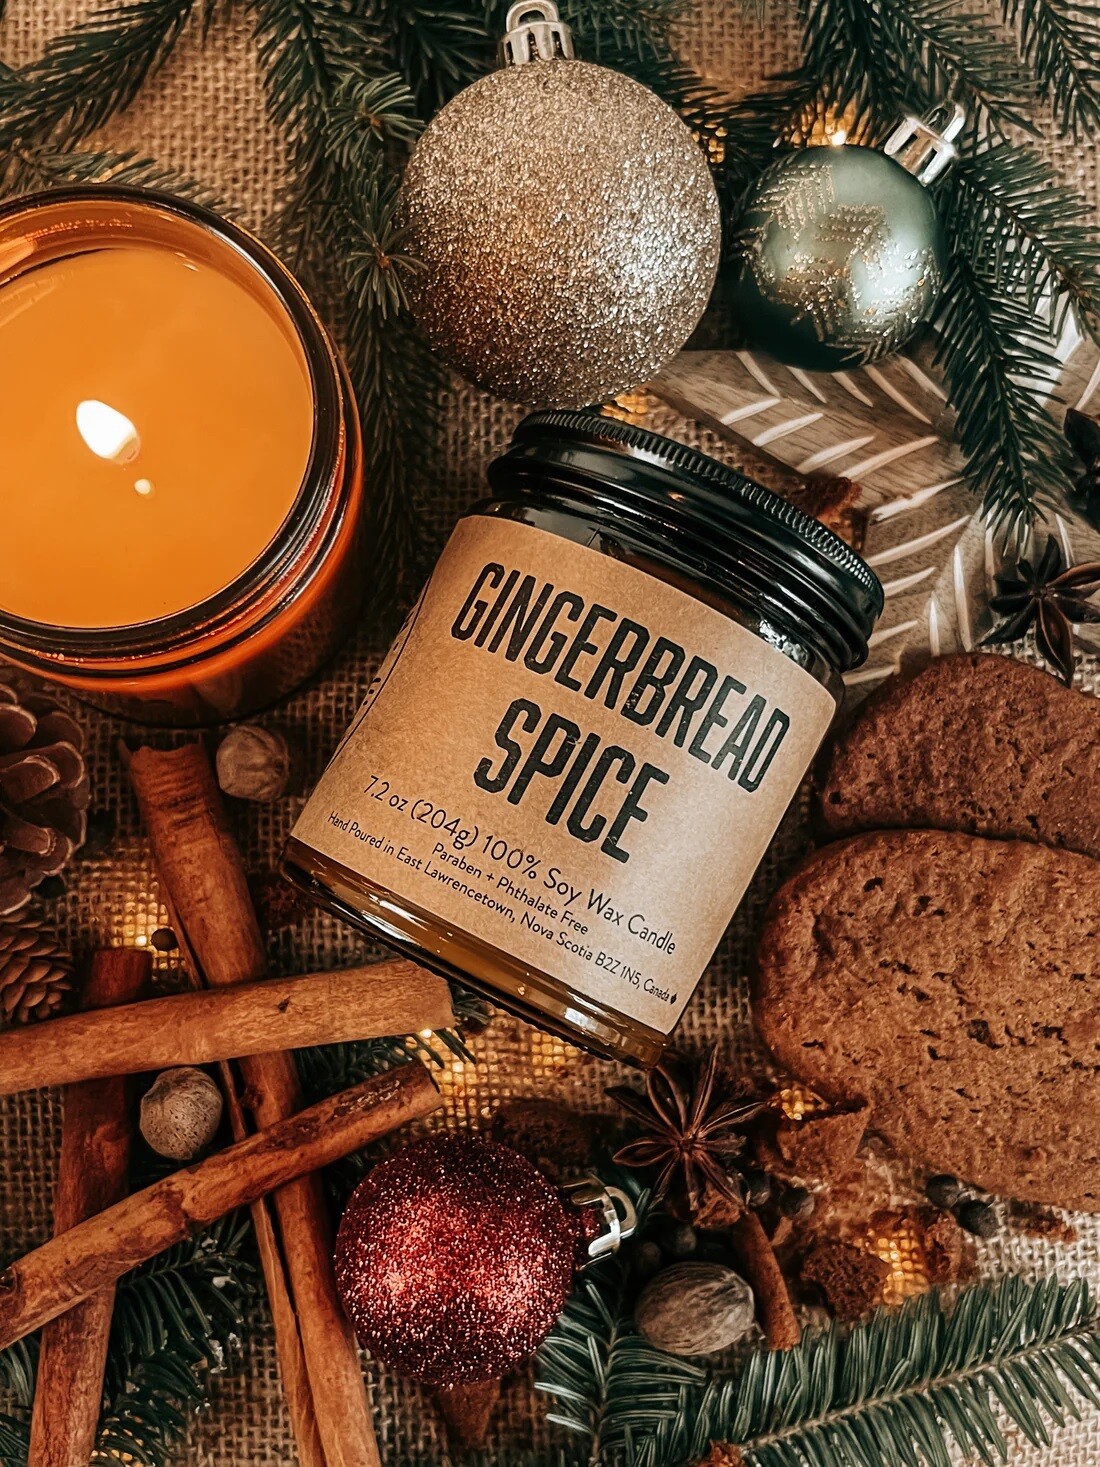 Gingerbread Spice- Lawrencetown Candle Co